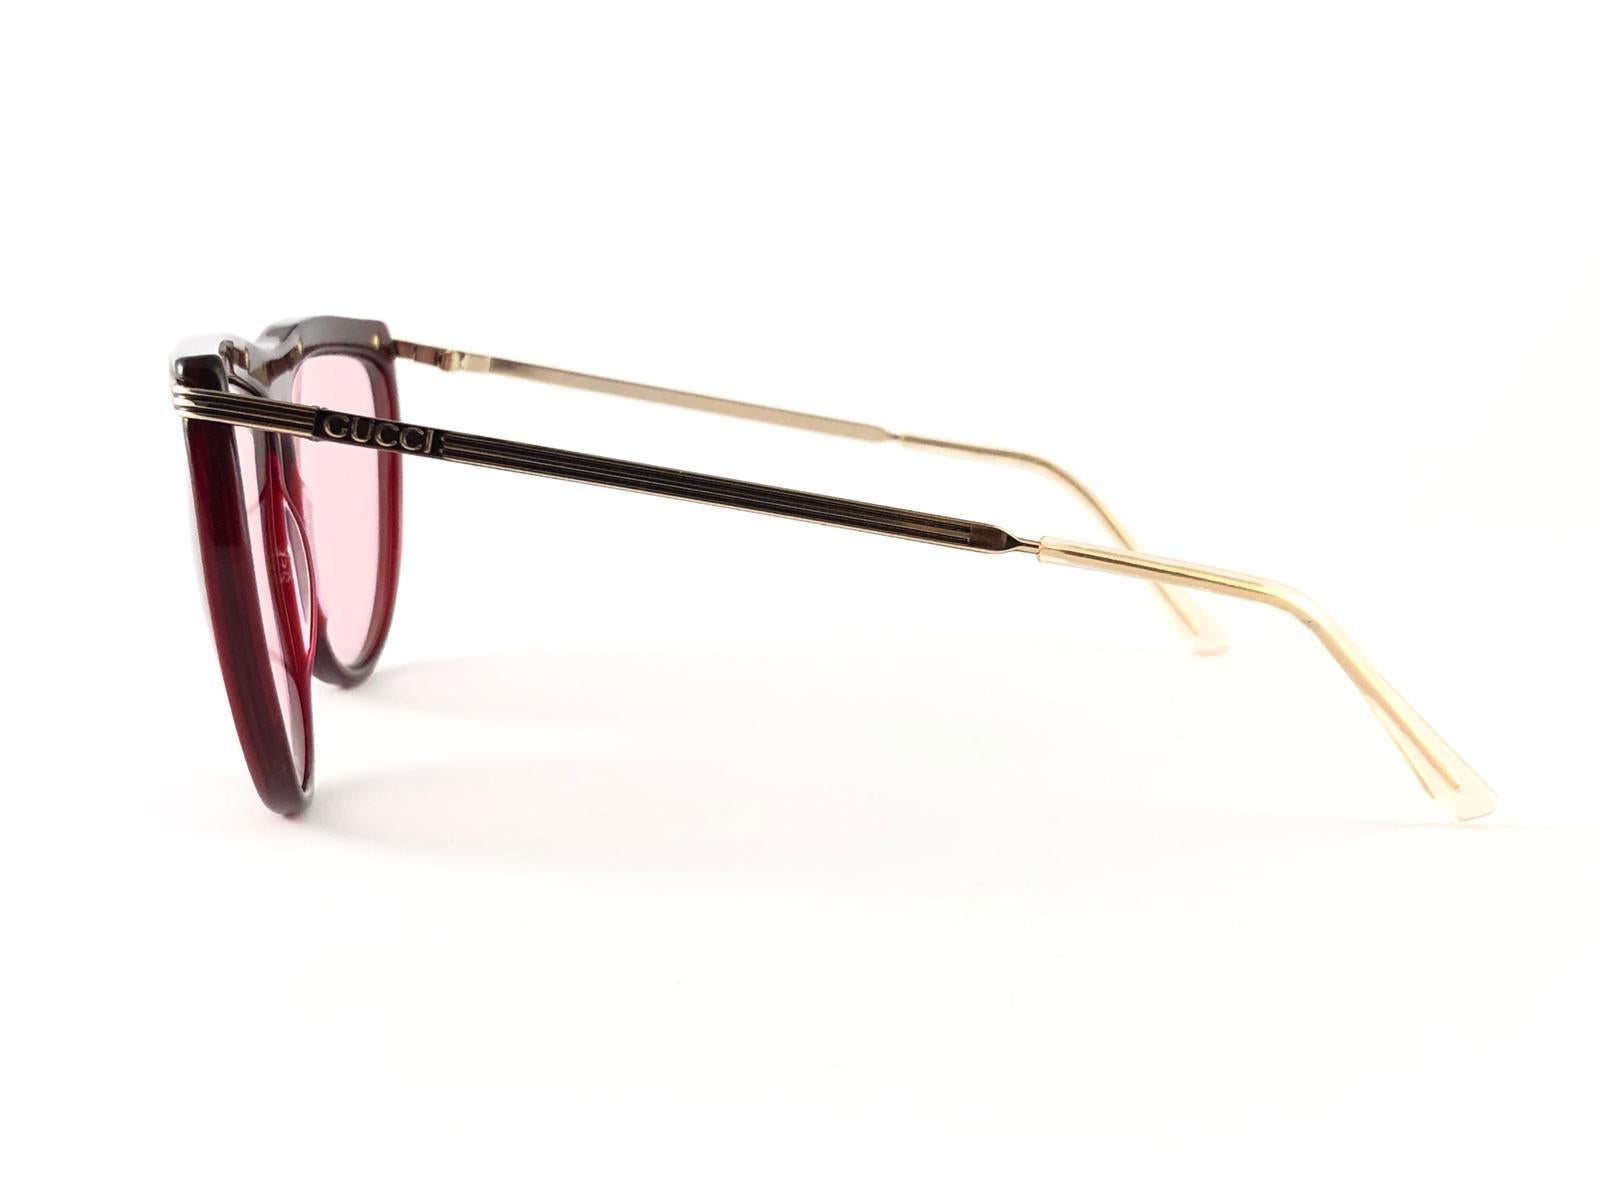 New Vintage Gucci 2303 Gold & Burgundy Accents Sunglasses 1980's Made in Italy For Sale 1